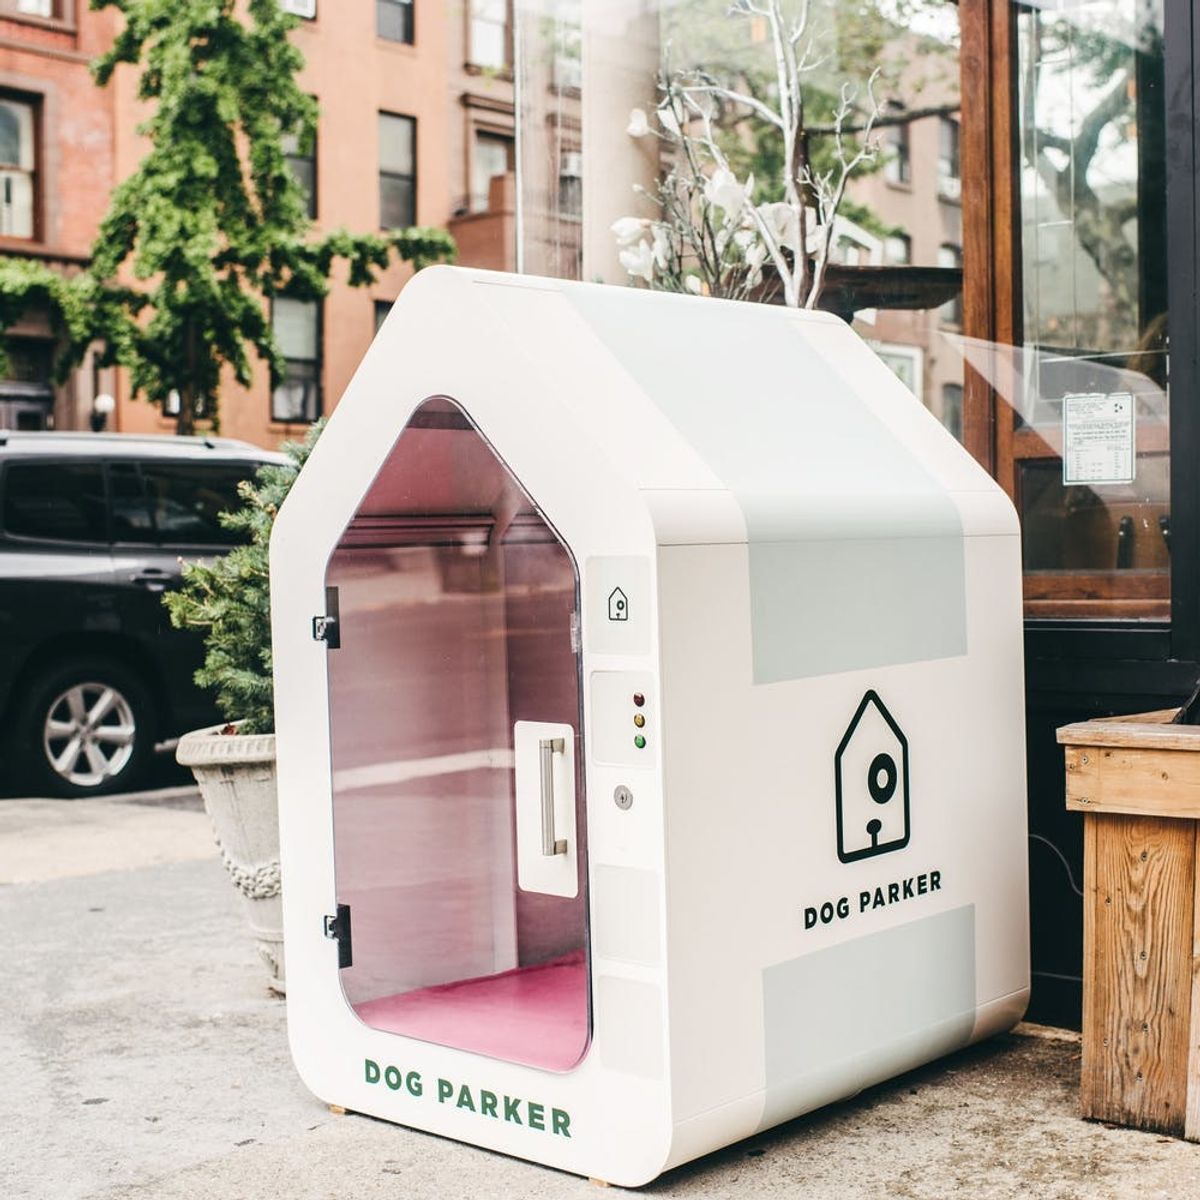 This Tech-Savvy Dog House Will Keep Your Pet Safe While You Run Errands